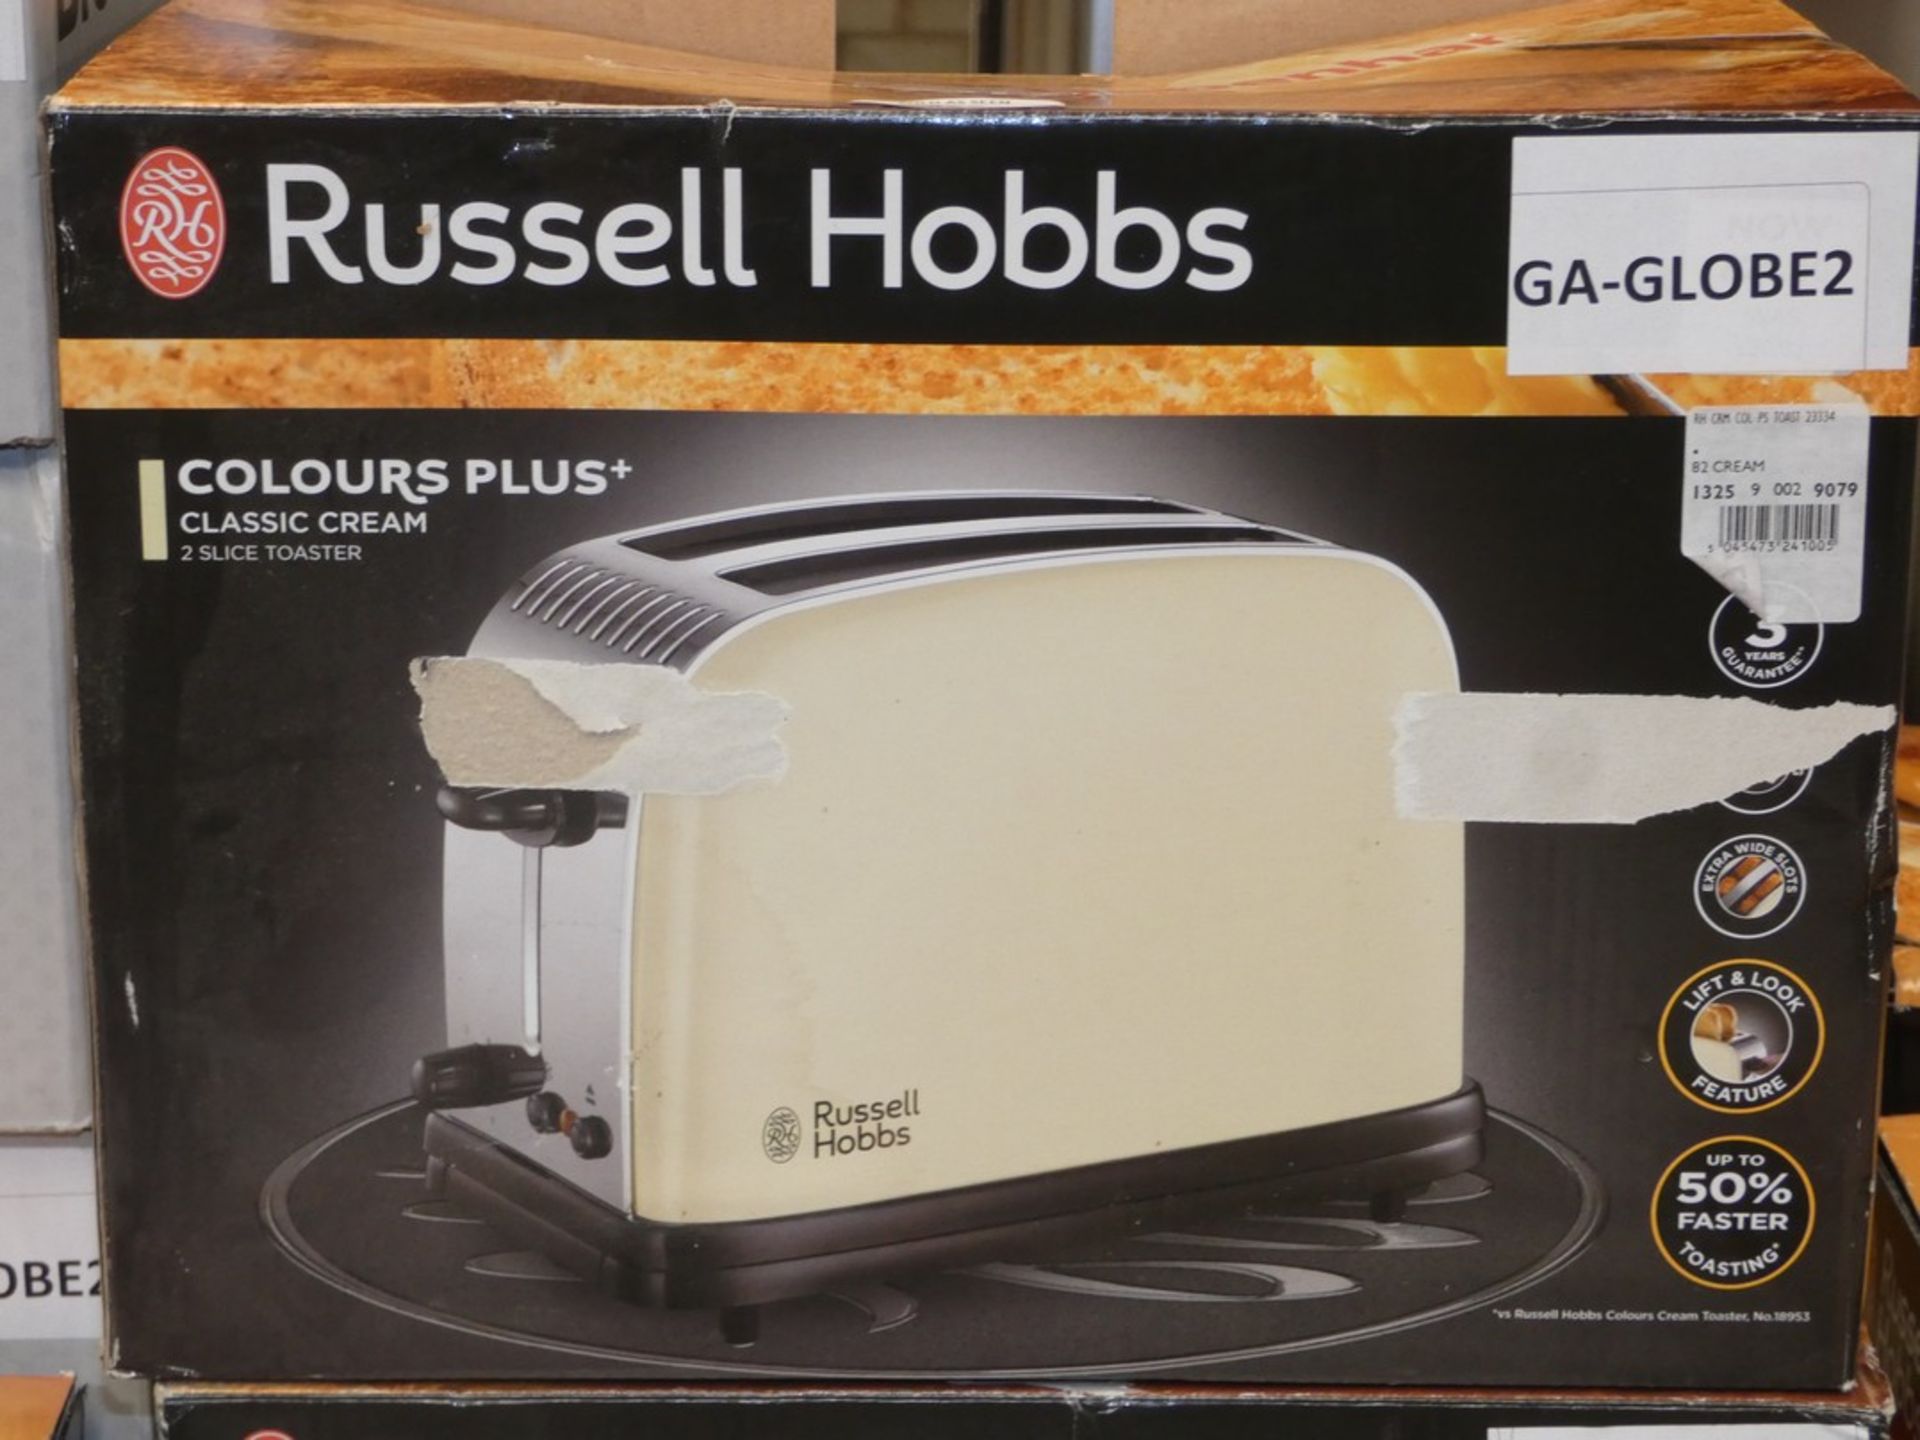 Boxed Russell Hobbs Colours Plus Classic Cream 2 Slice Toasters RRP £30 Each